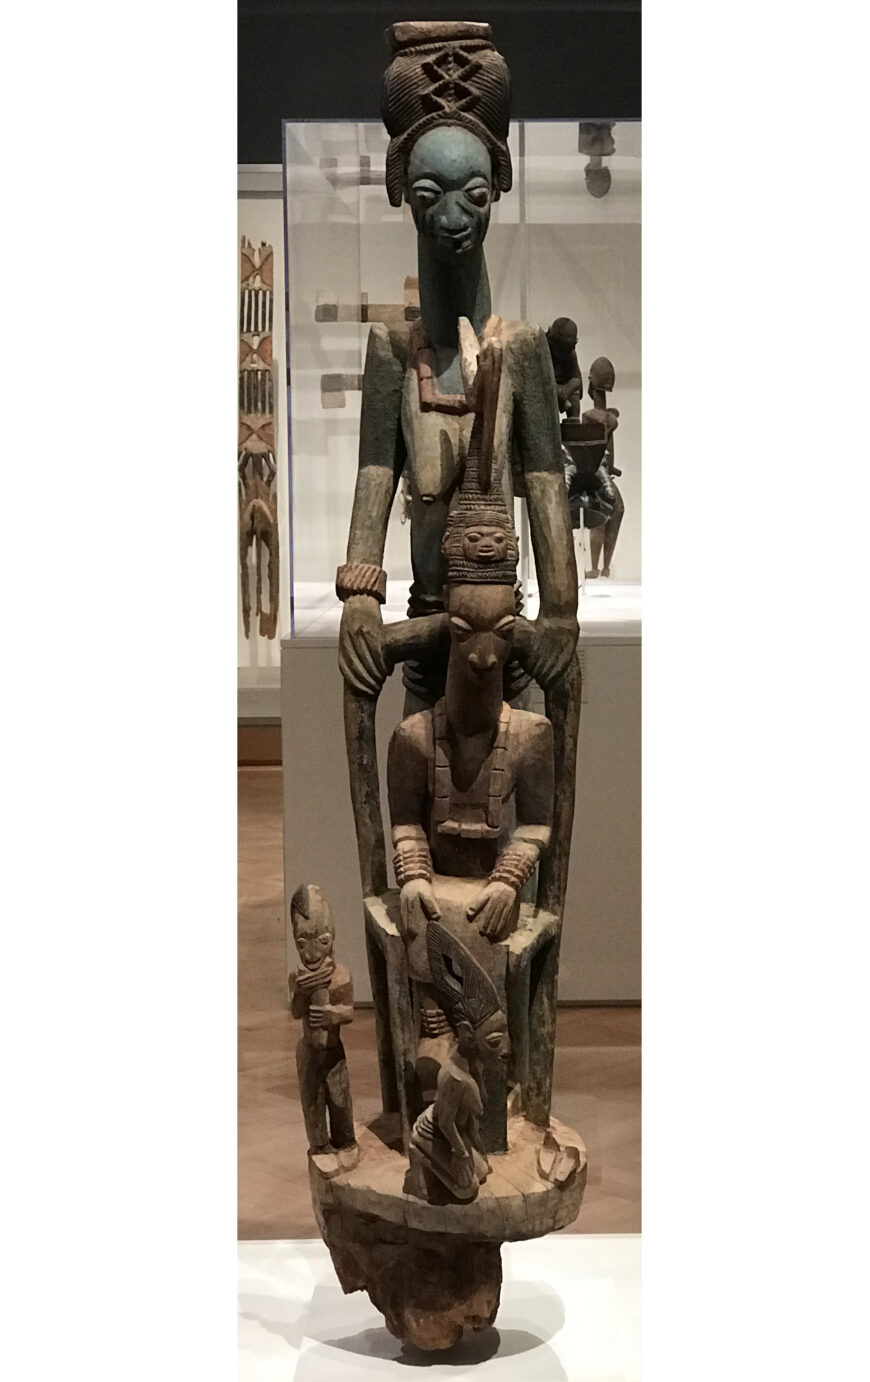 Olowe of Ise, Veranda Post of Enthroned King and Senior Wife, early 20th century, wood and pigment (Art Institute of Chicago; photo: Dr. Delinda Collier, CC BY-NC-ND 4.0)